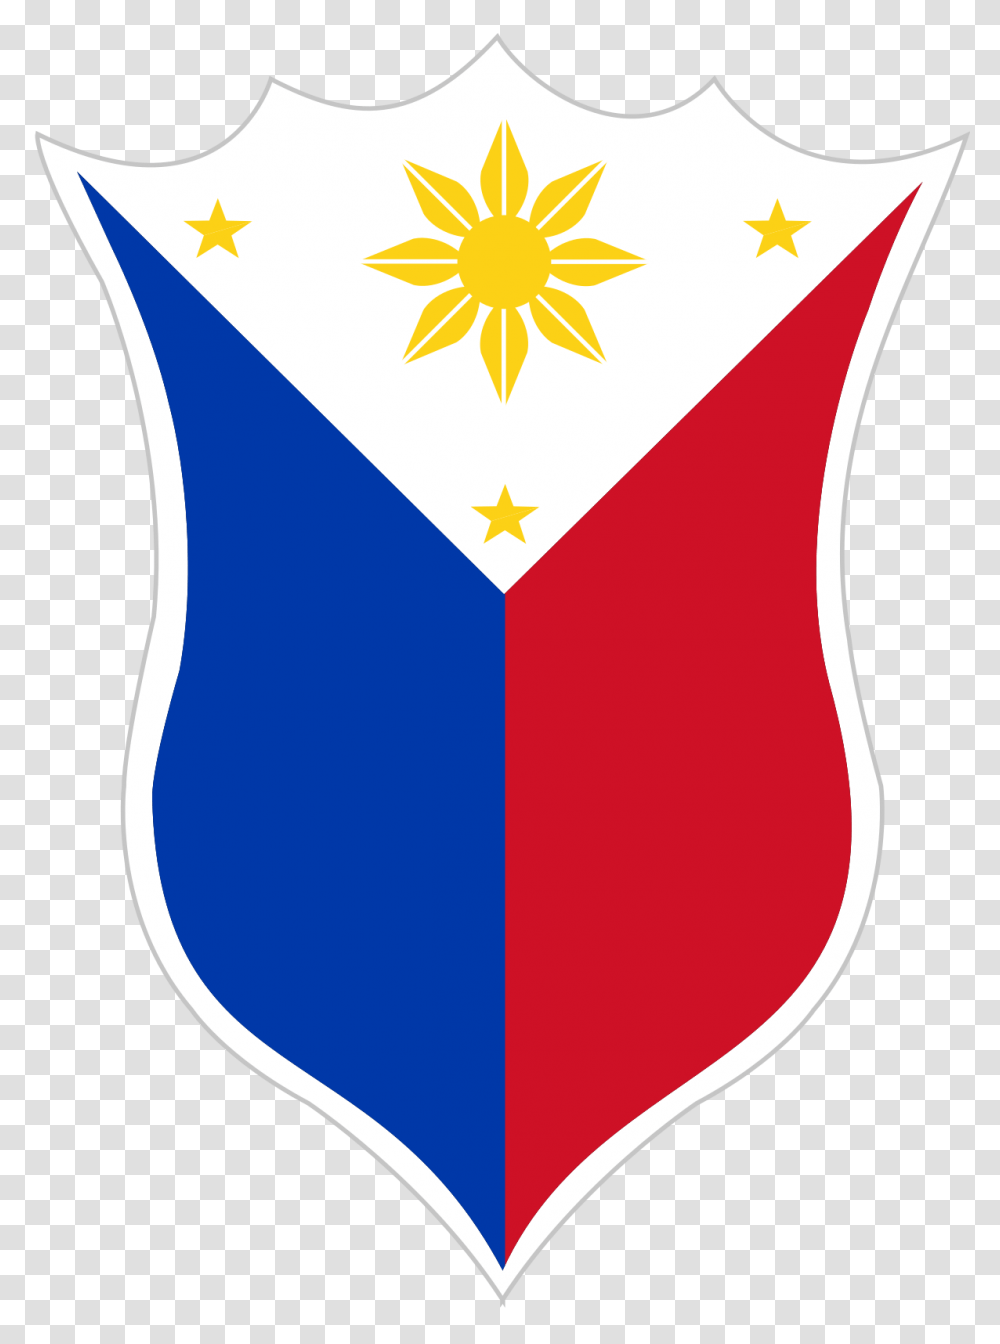 Philippines Mens National Basketball Team, Armor, Shield Transparent Png